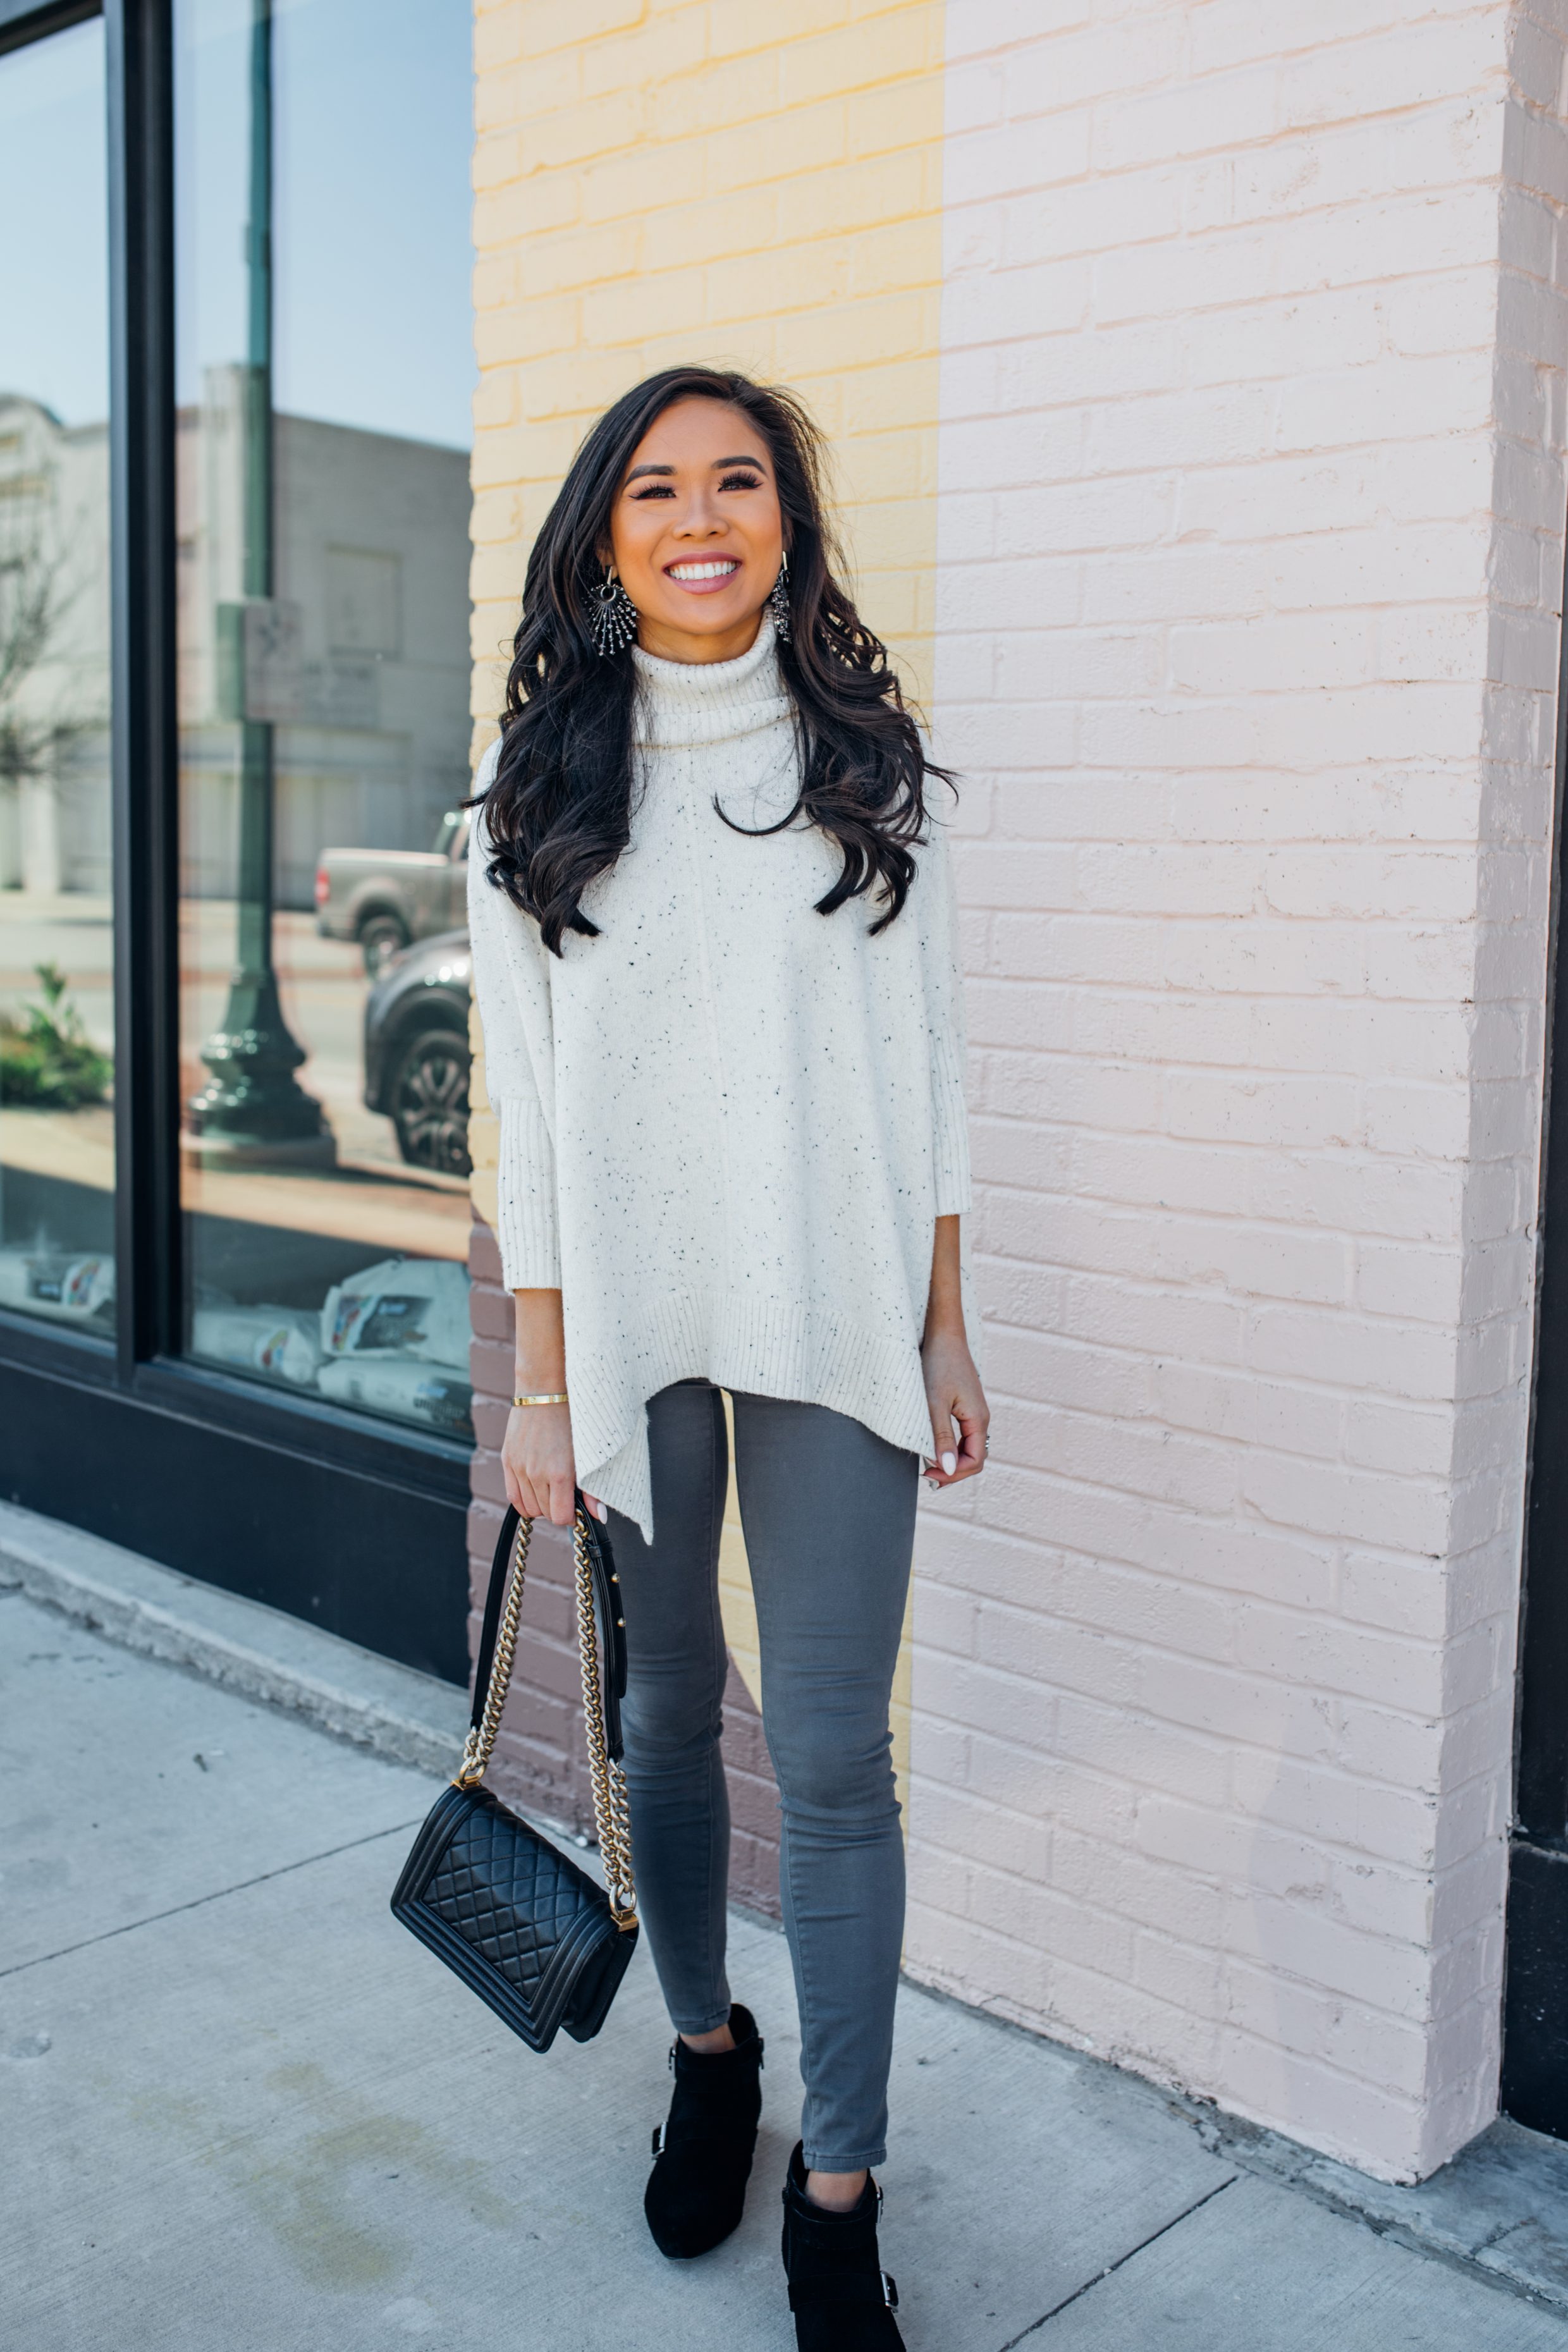 Blogger Hoang-Kim shares a casual winter outfit